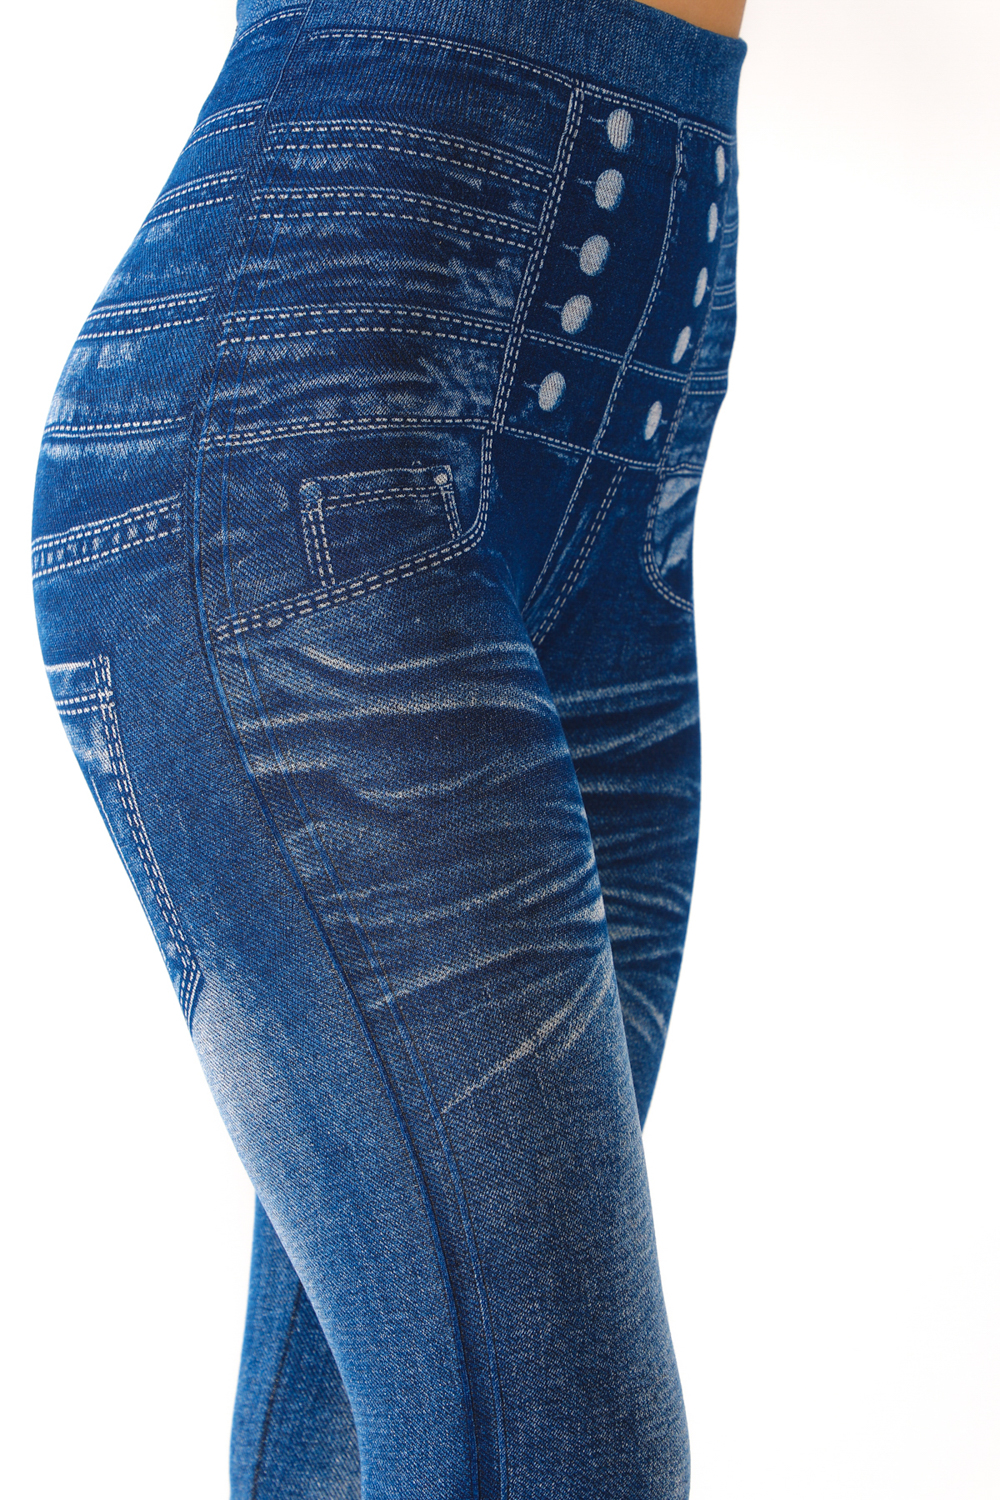  Jean Leggings With Pockets